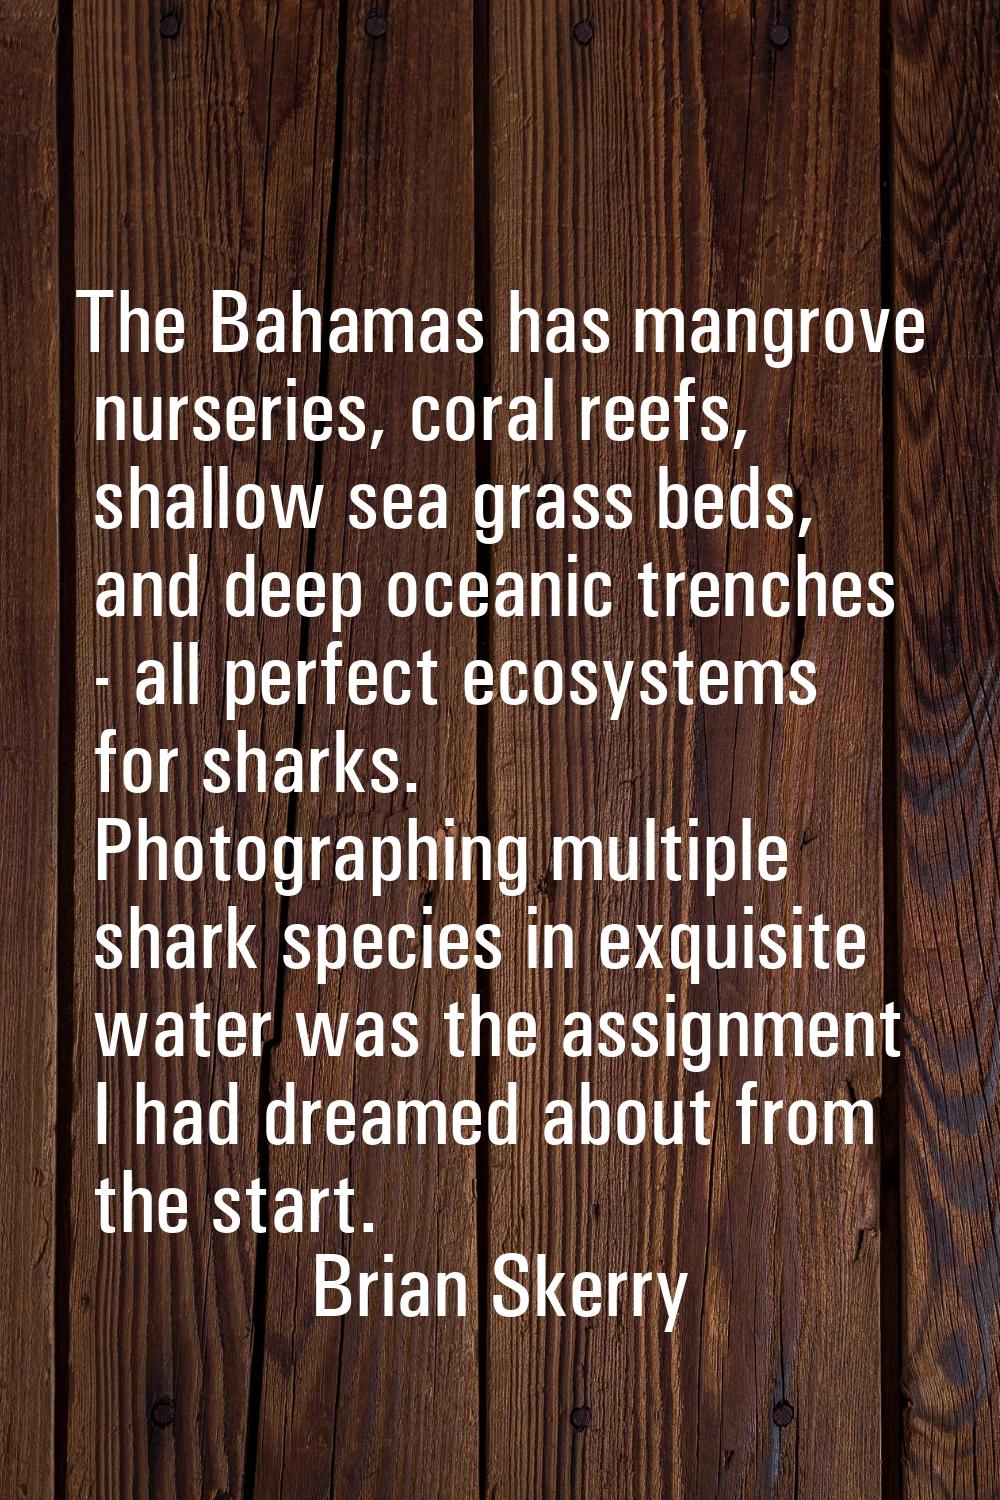 The Bahamas has mangrove nurseries, coral reefs, shallow sea grass beds, and deep oceanic trenches 